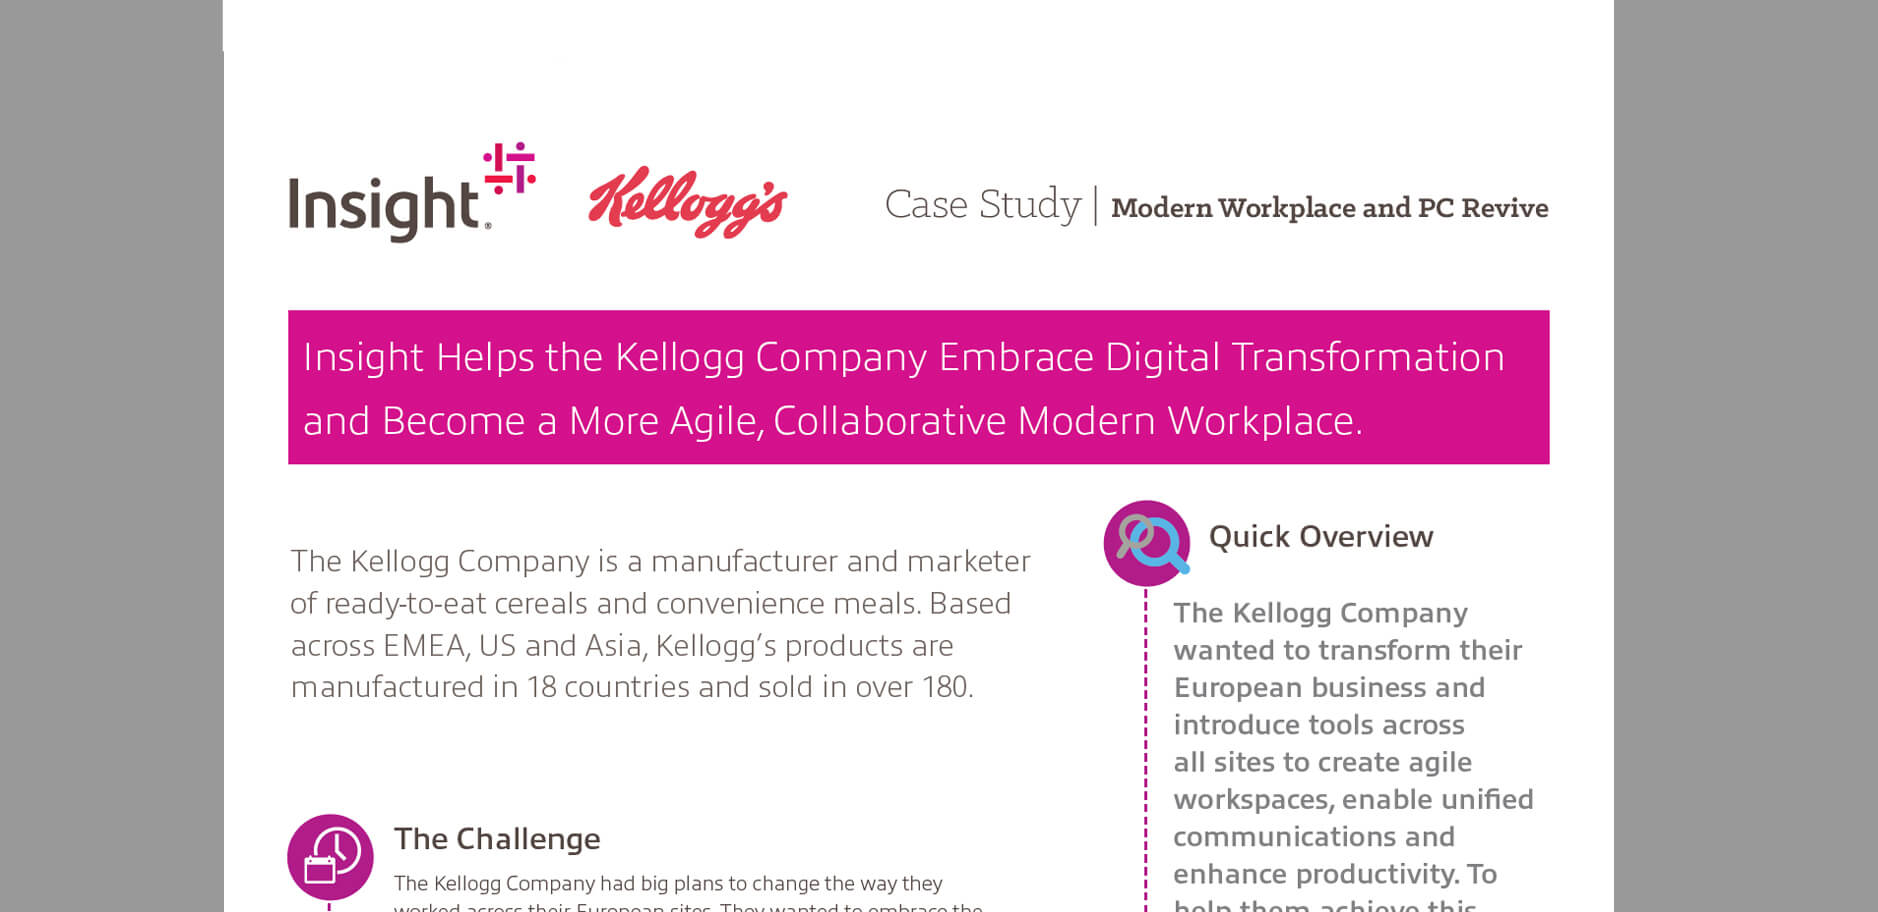 Article Kellogg's: Become a more Agile, Collaborative Modern Workplace Image